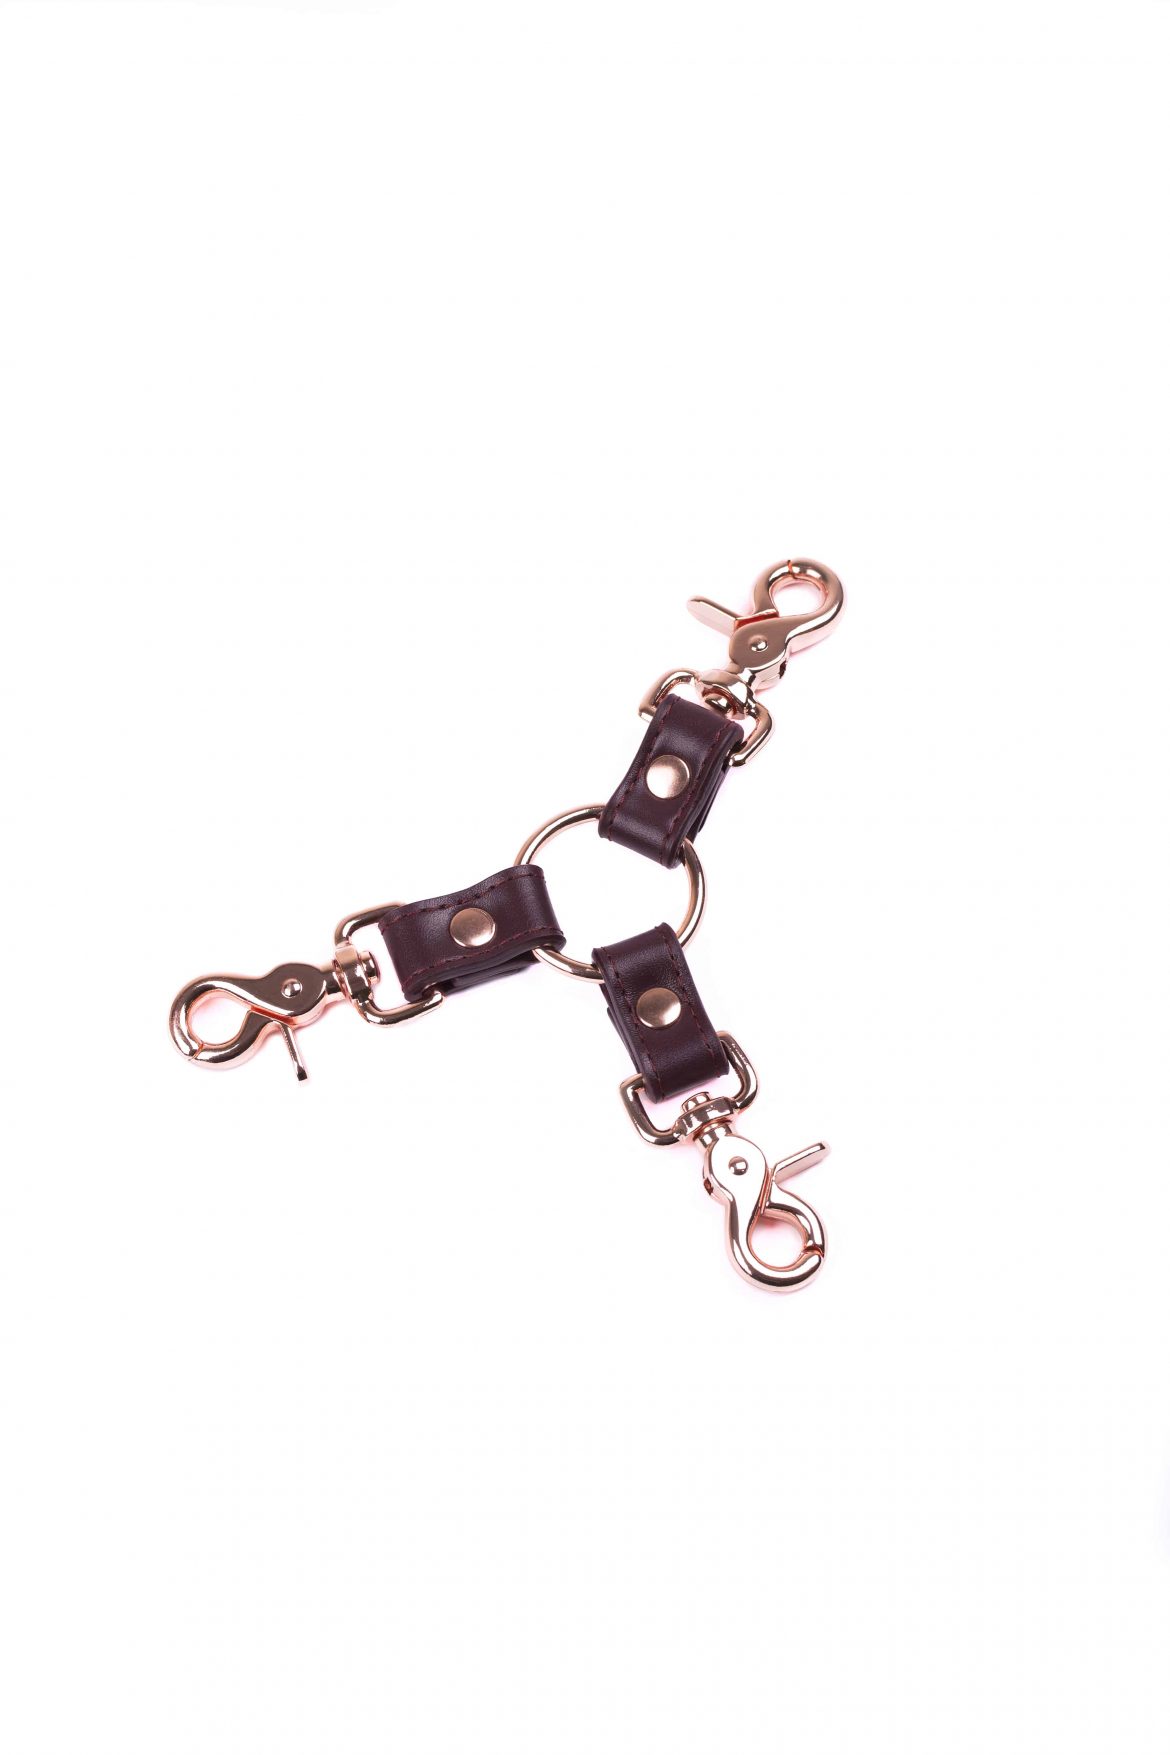 bdsm leather bondage set collar leash handcuffs pair of double fixation23 scaled